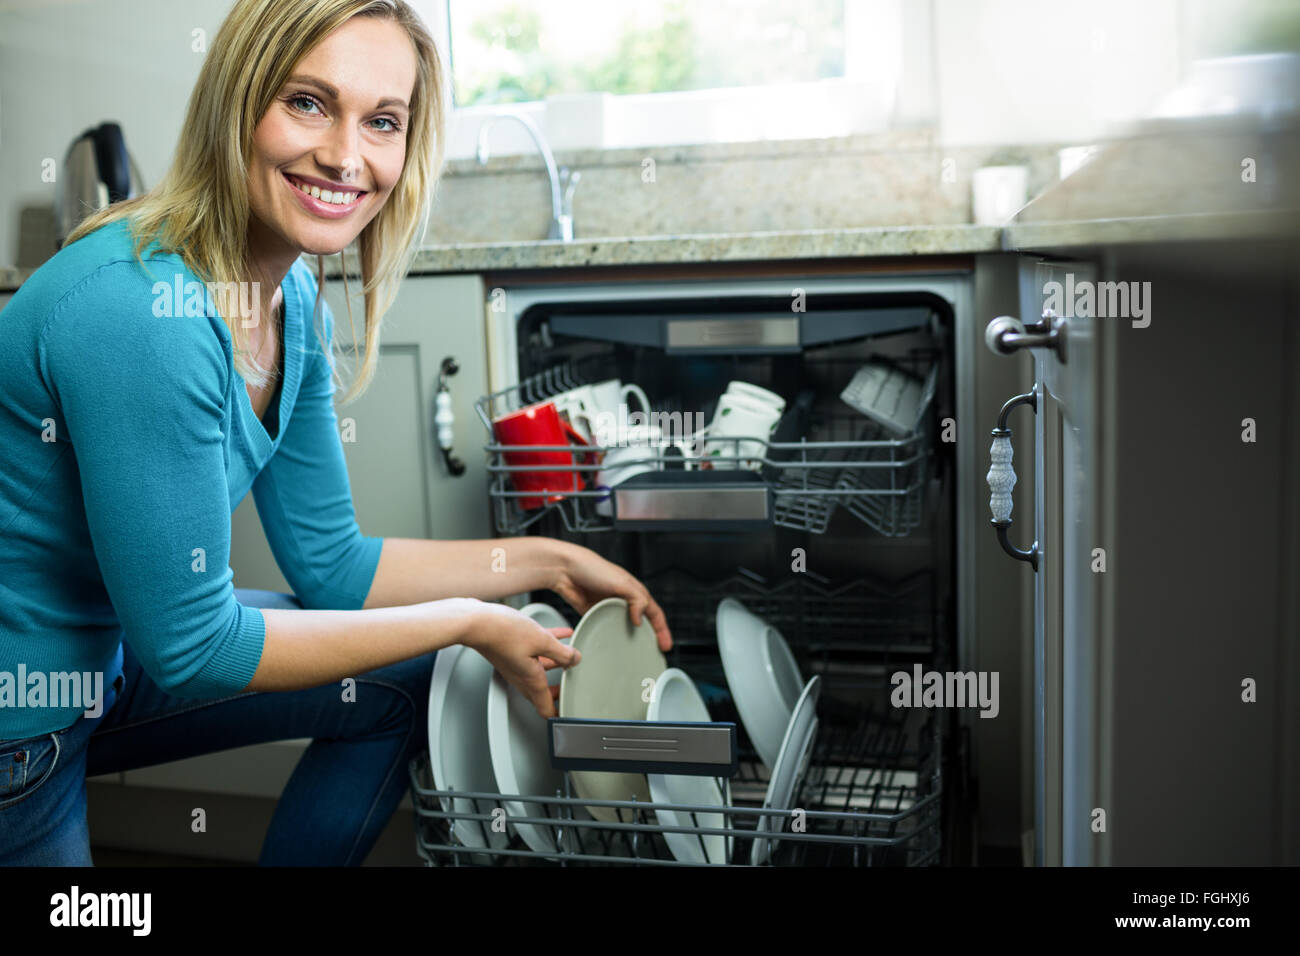 6. Blonde Hair Color Maintenance Tips for Dishwasher Users - wide 10